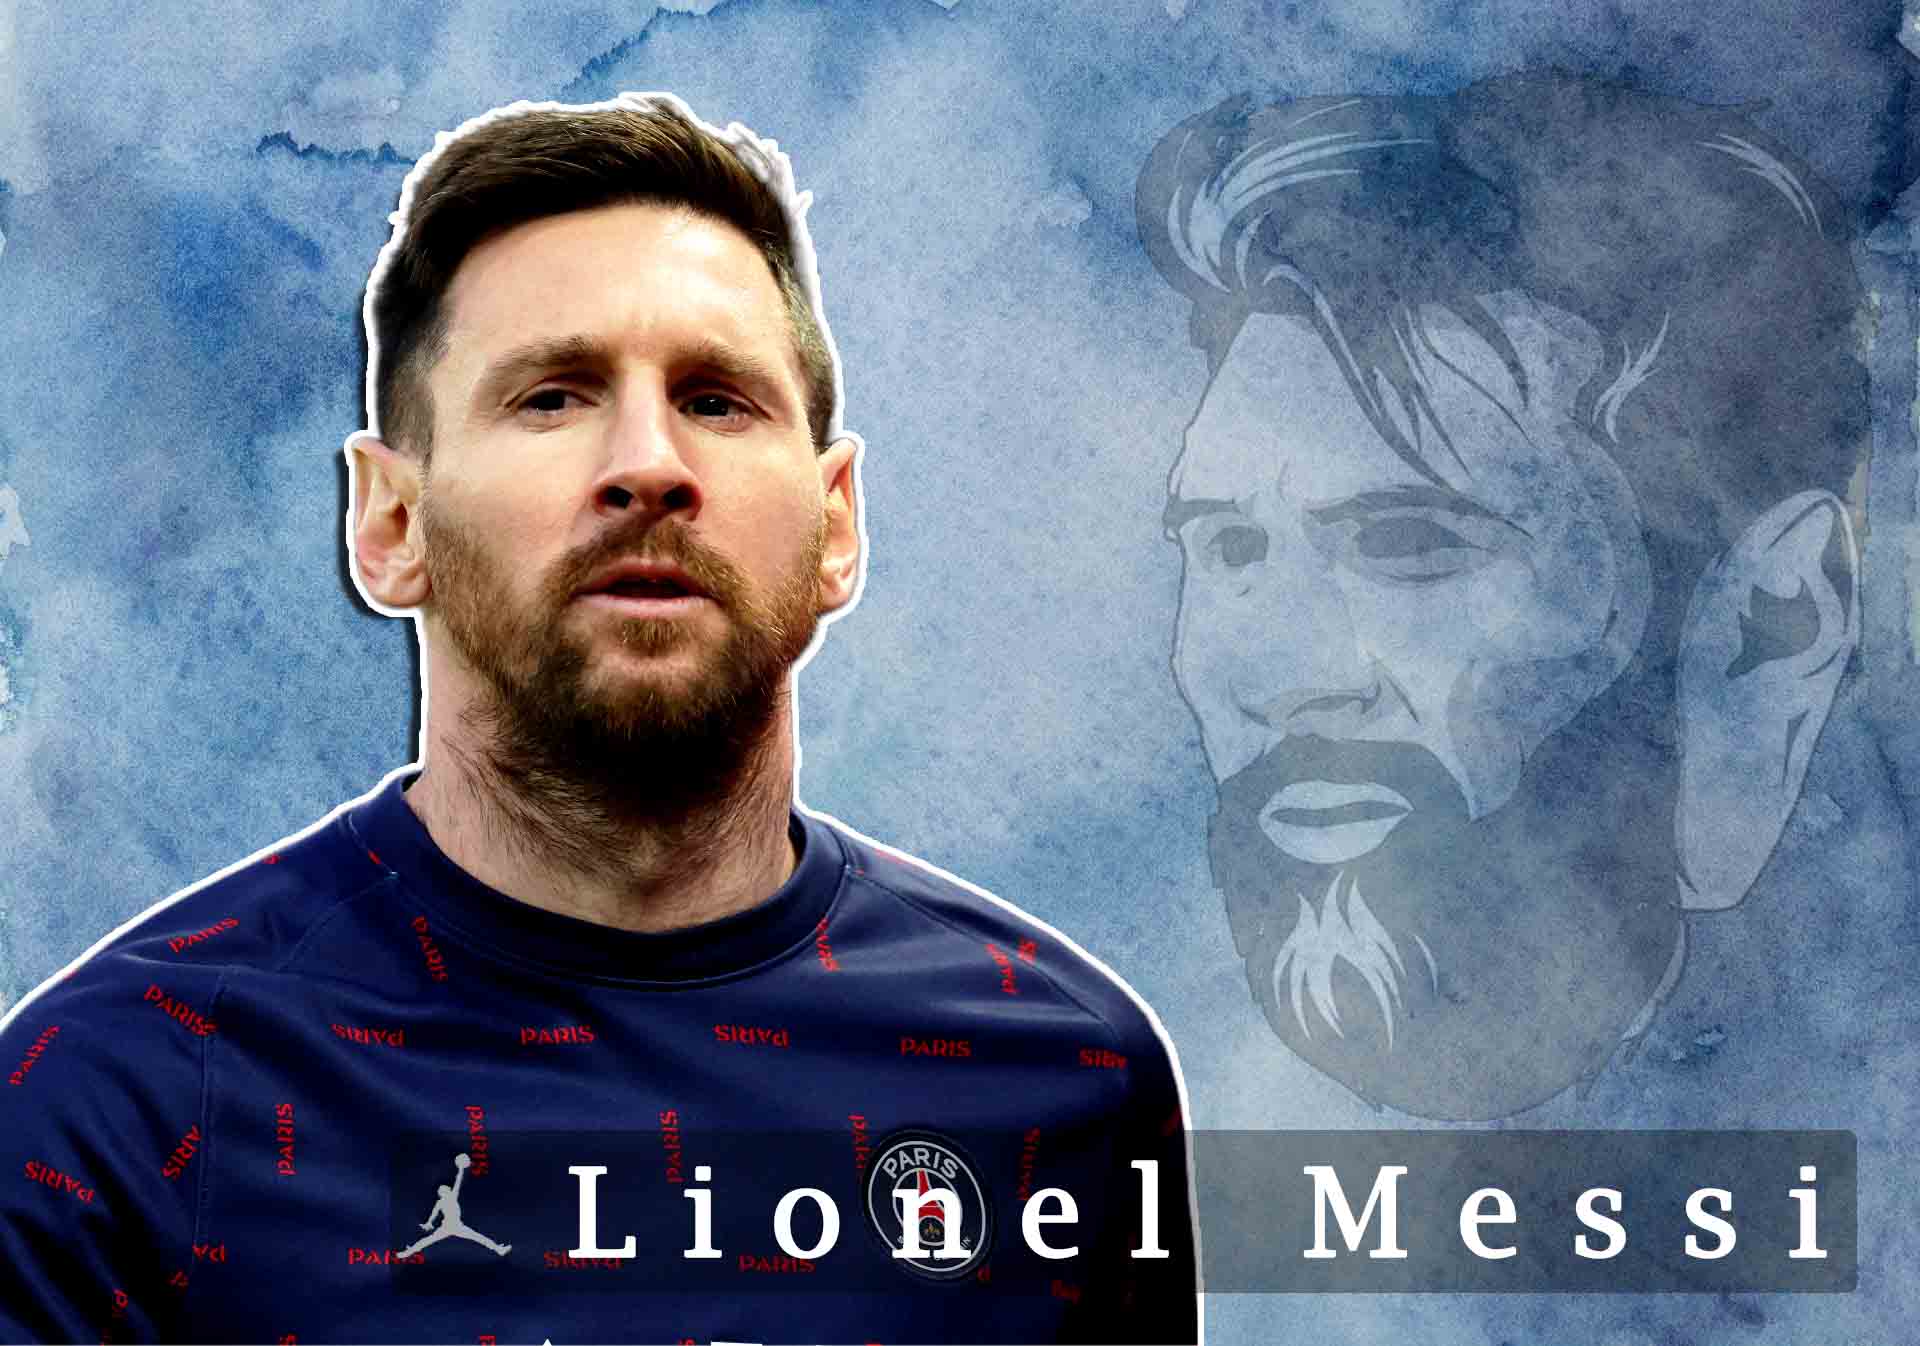 Lionel Messi The Best Player In 2022 - PSG » All BD Today